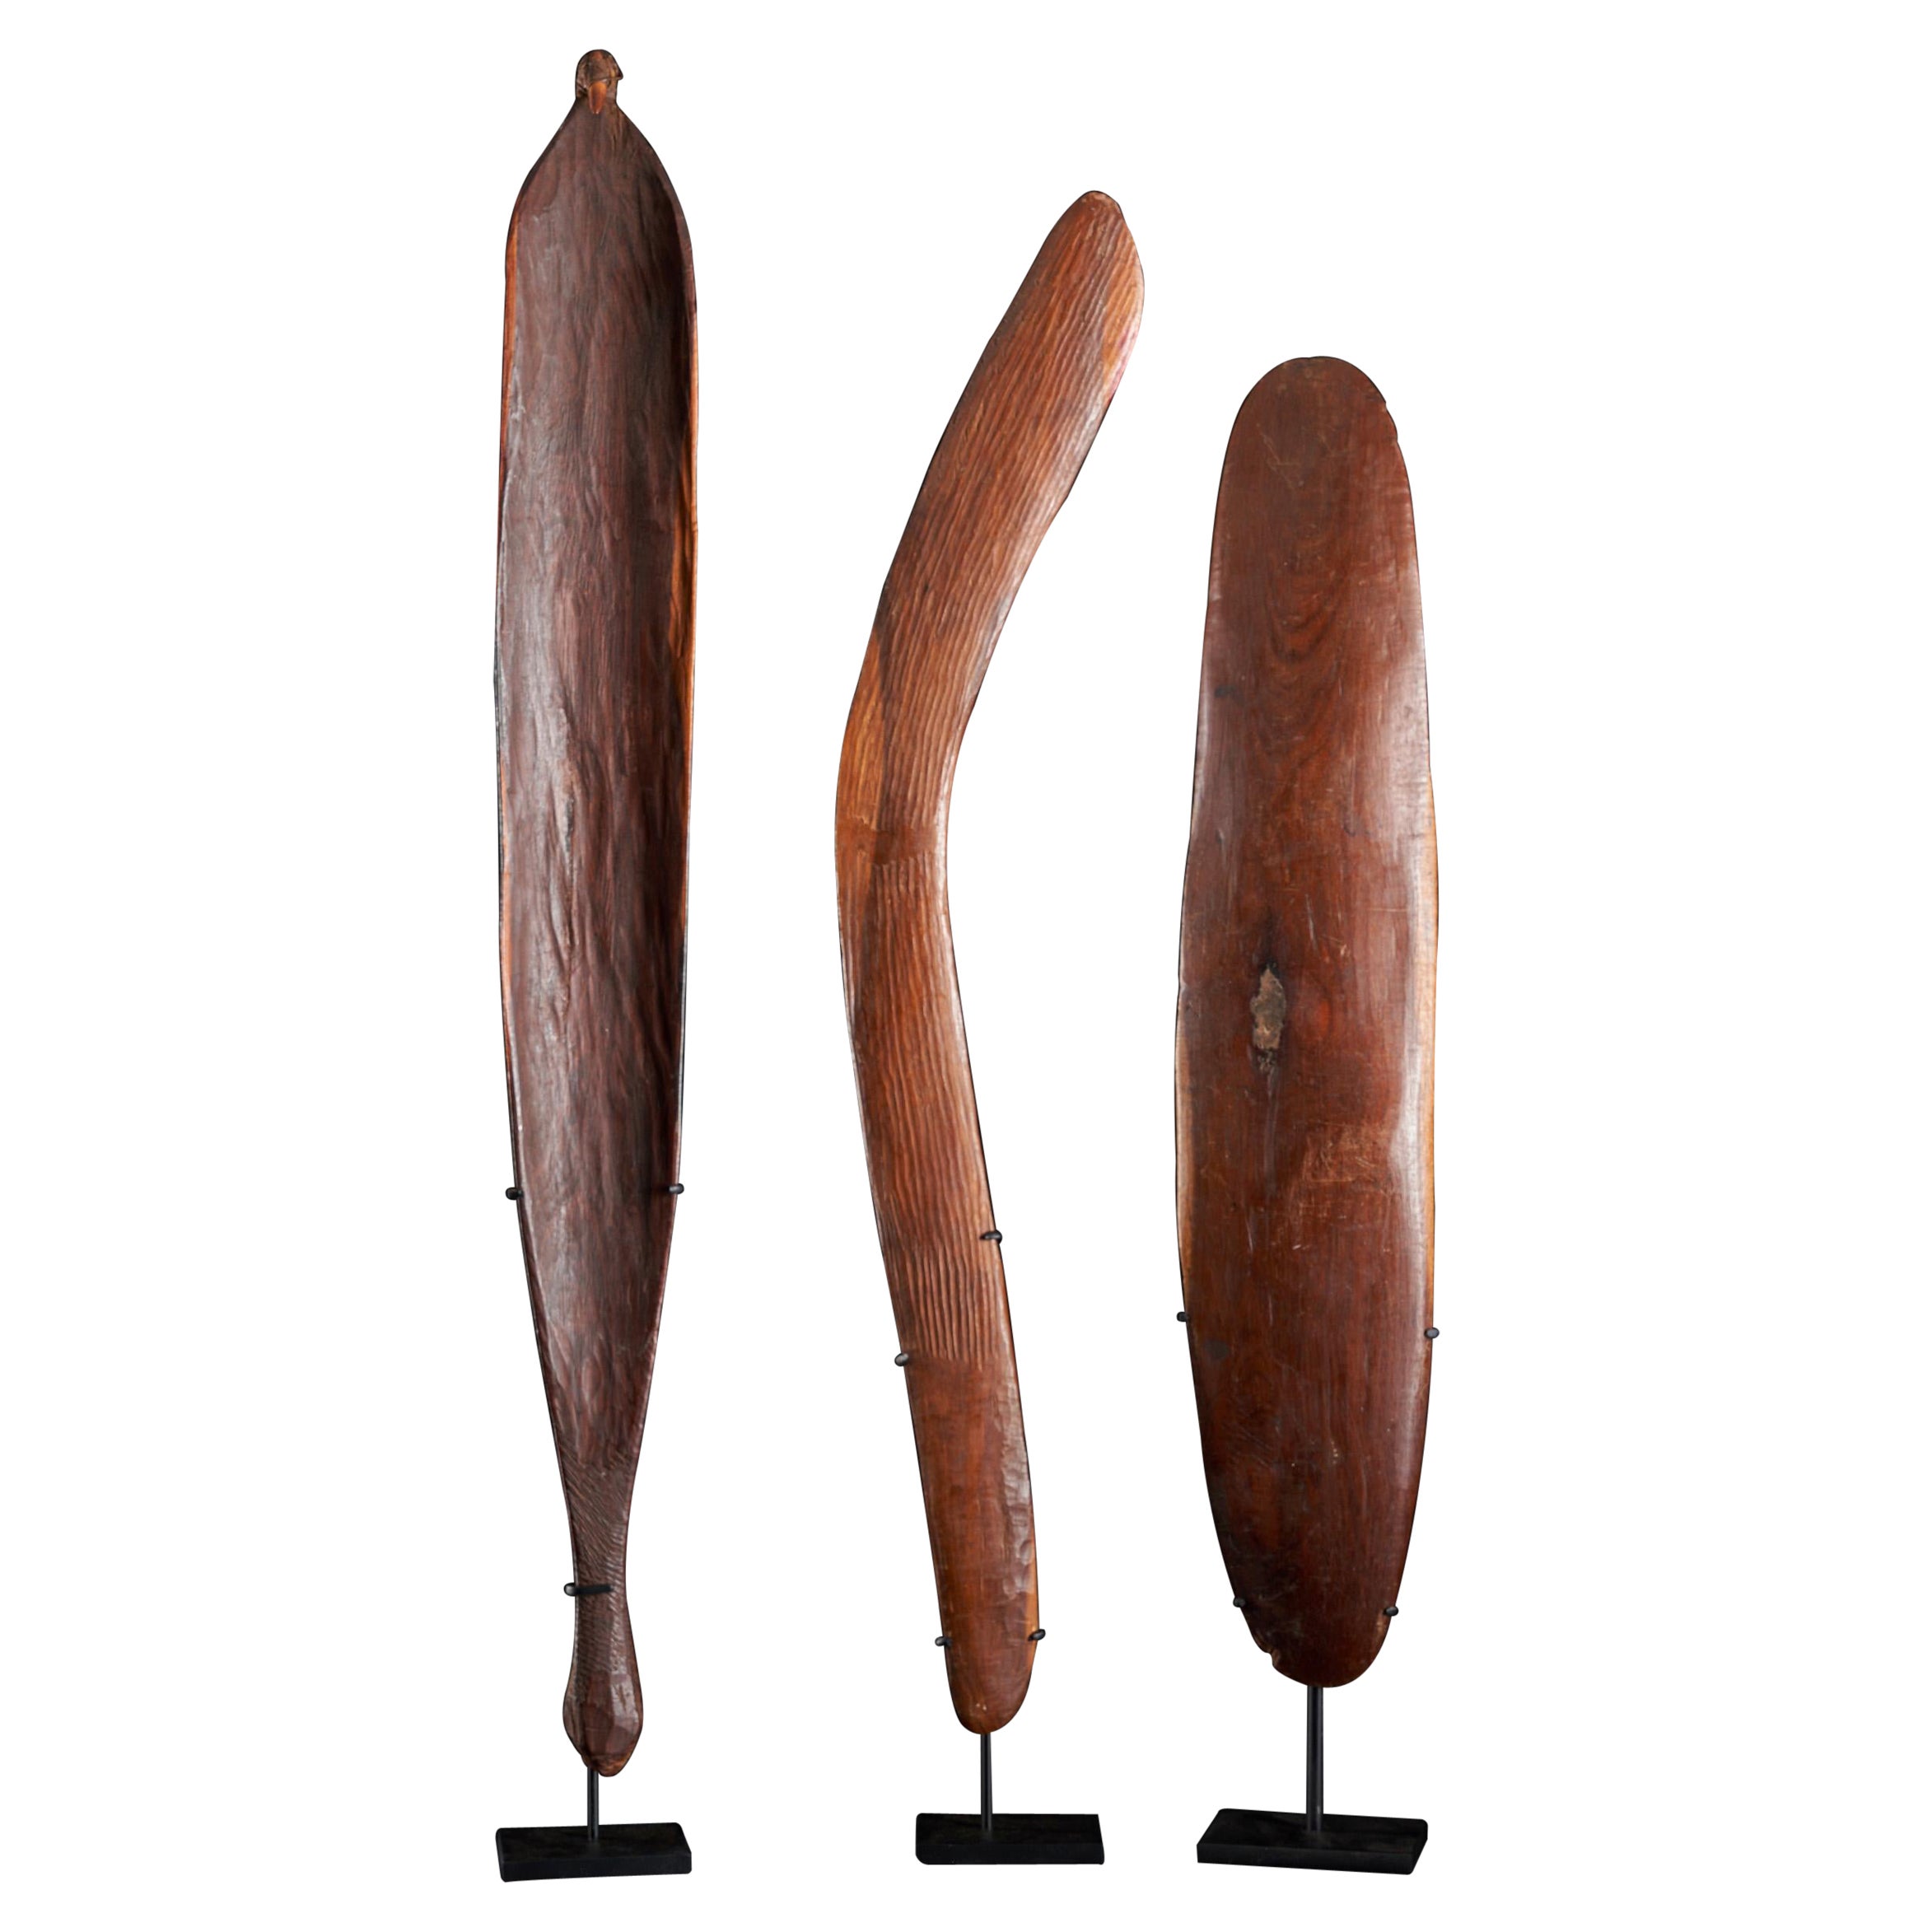 Set of Australian Aboriginal Items with Spear Thrower, Shield and Boomerang